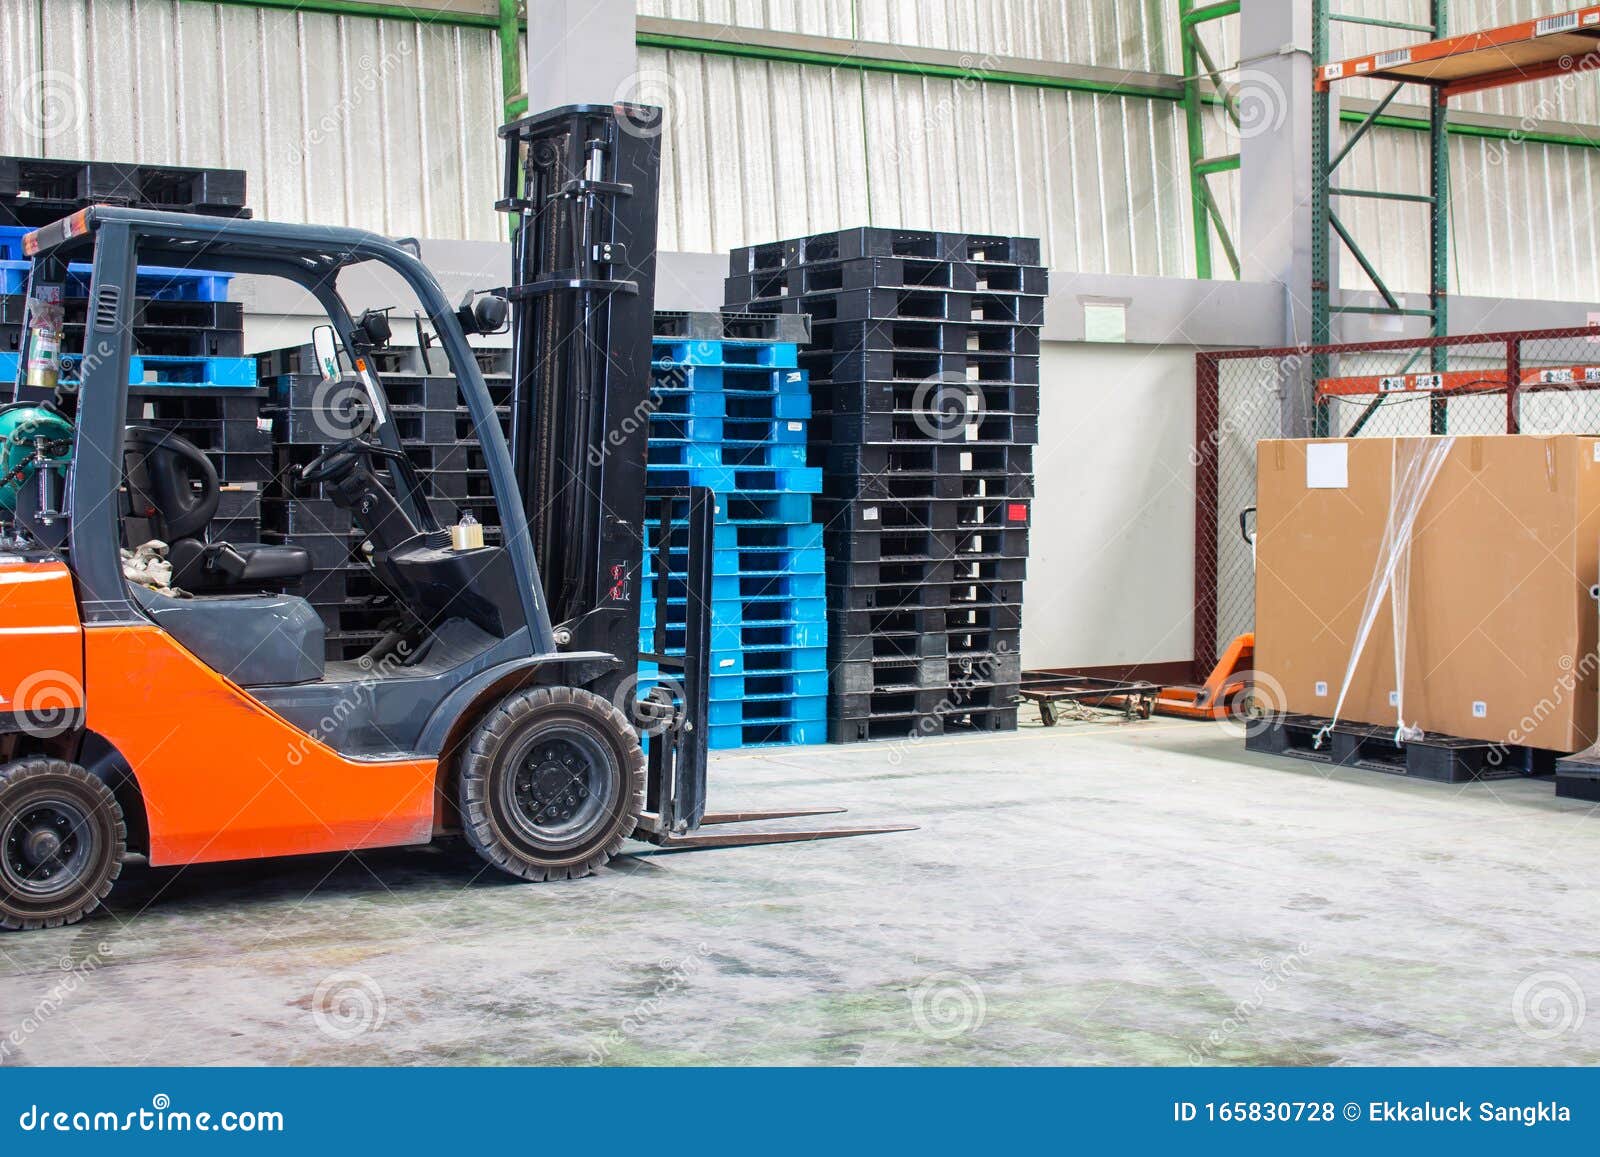 Forklifts With Plastic Palate Ready For Use Stock Photo Image Of Package Facility 165830728